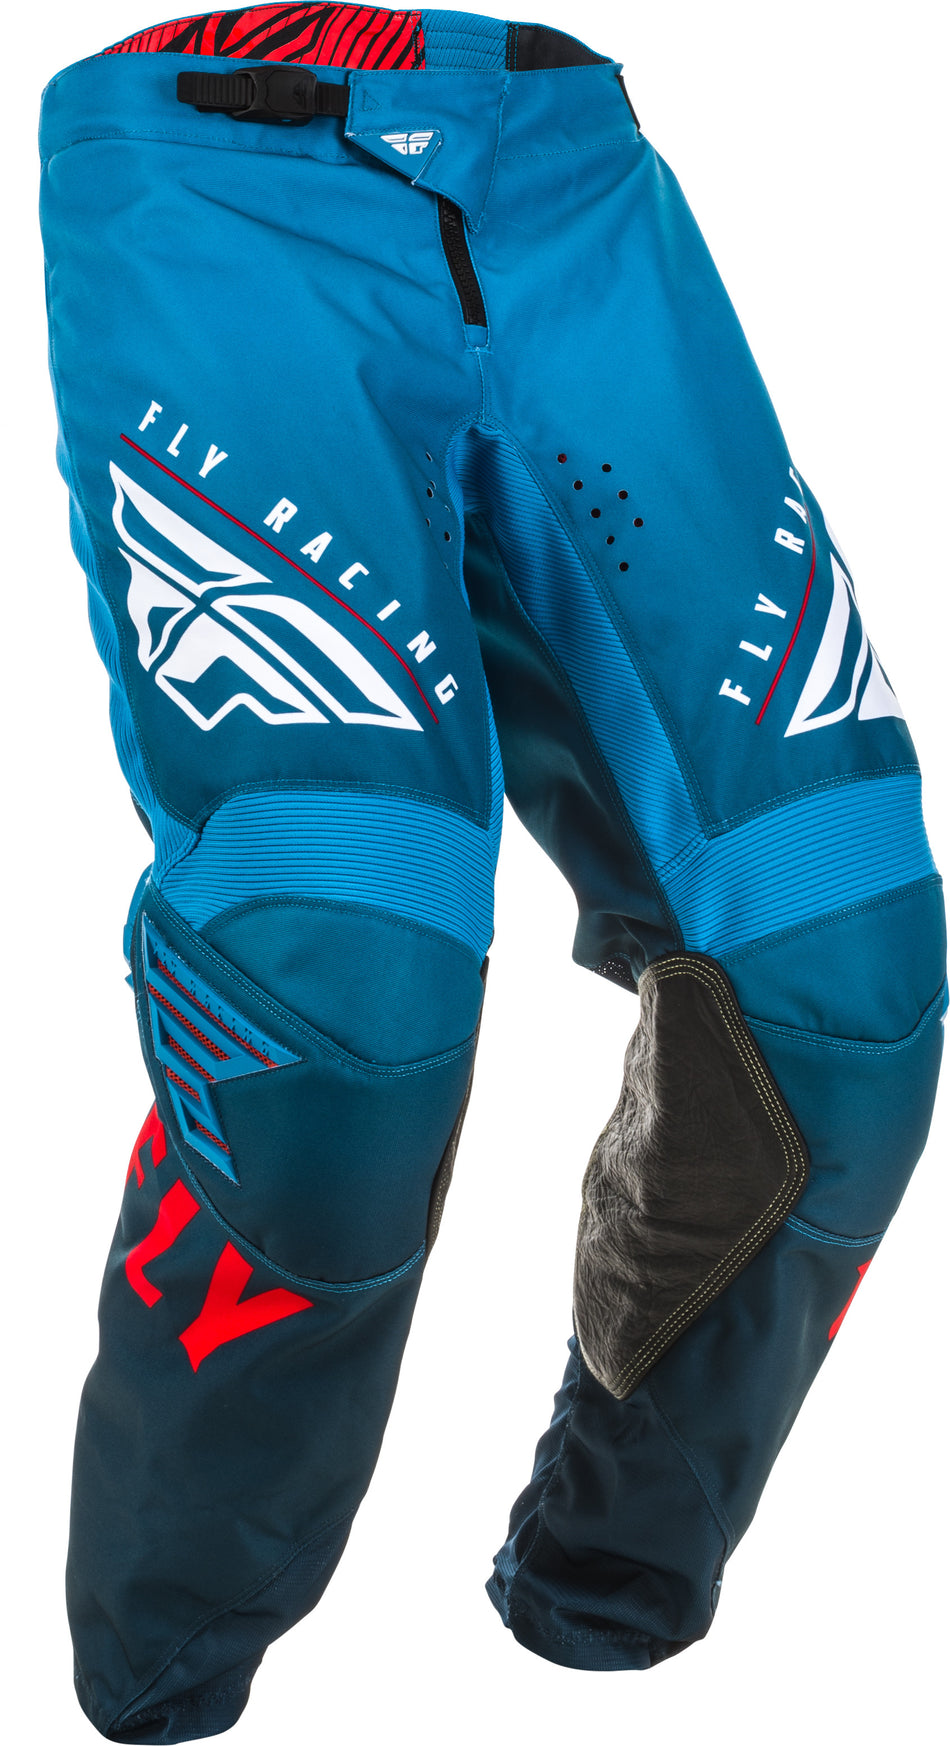 FLY RACING Kinetic K220 Pants Blue/White/Red Sz 34 373-53134